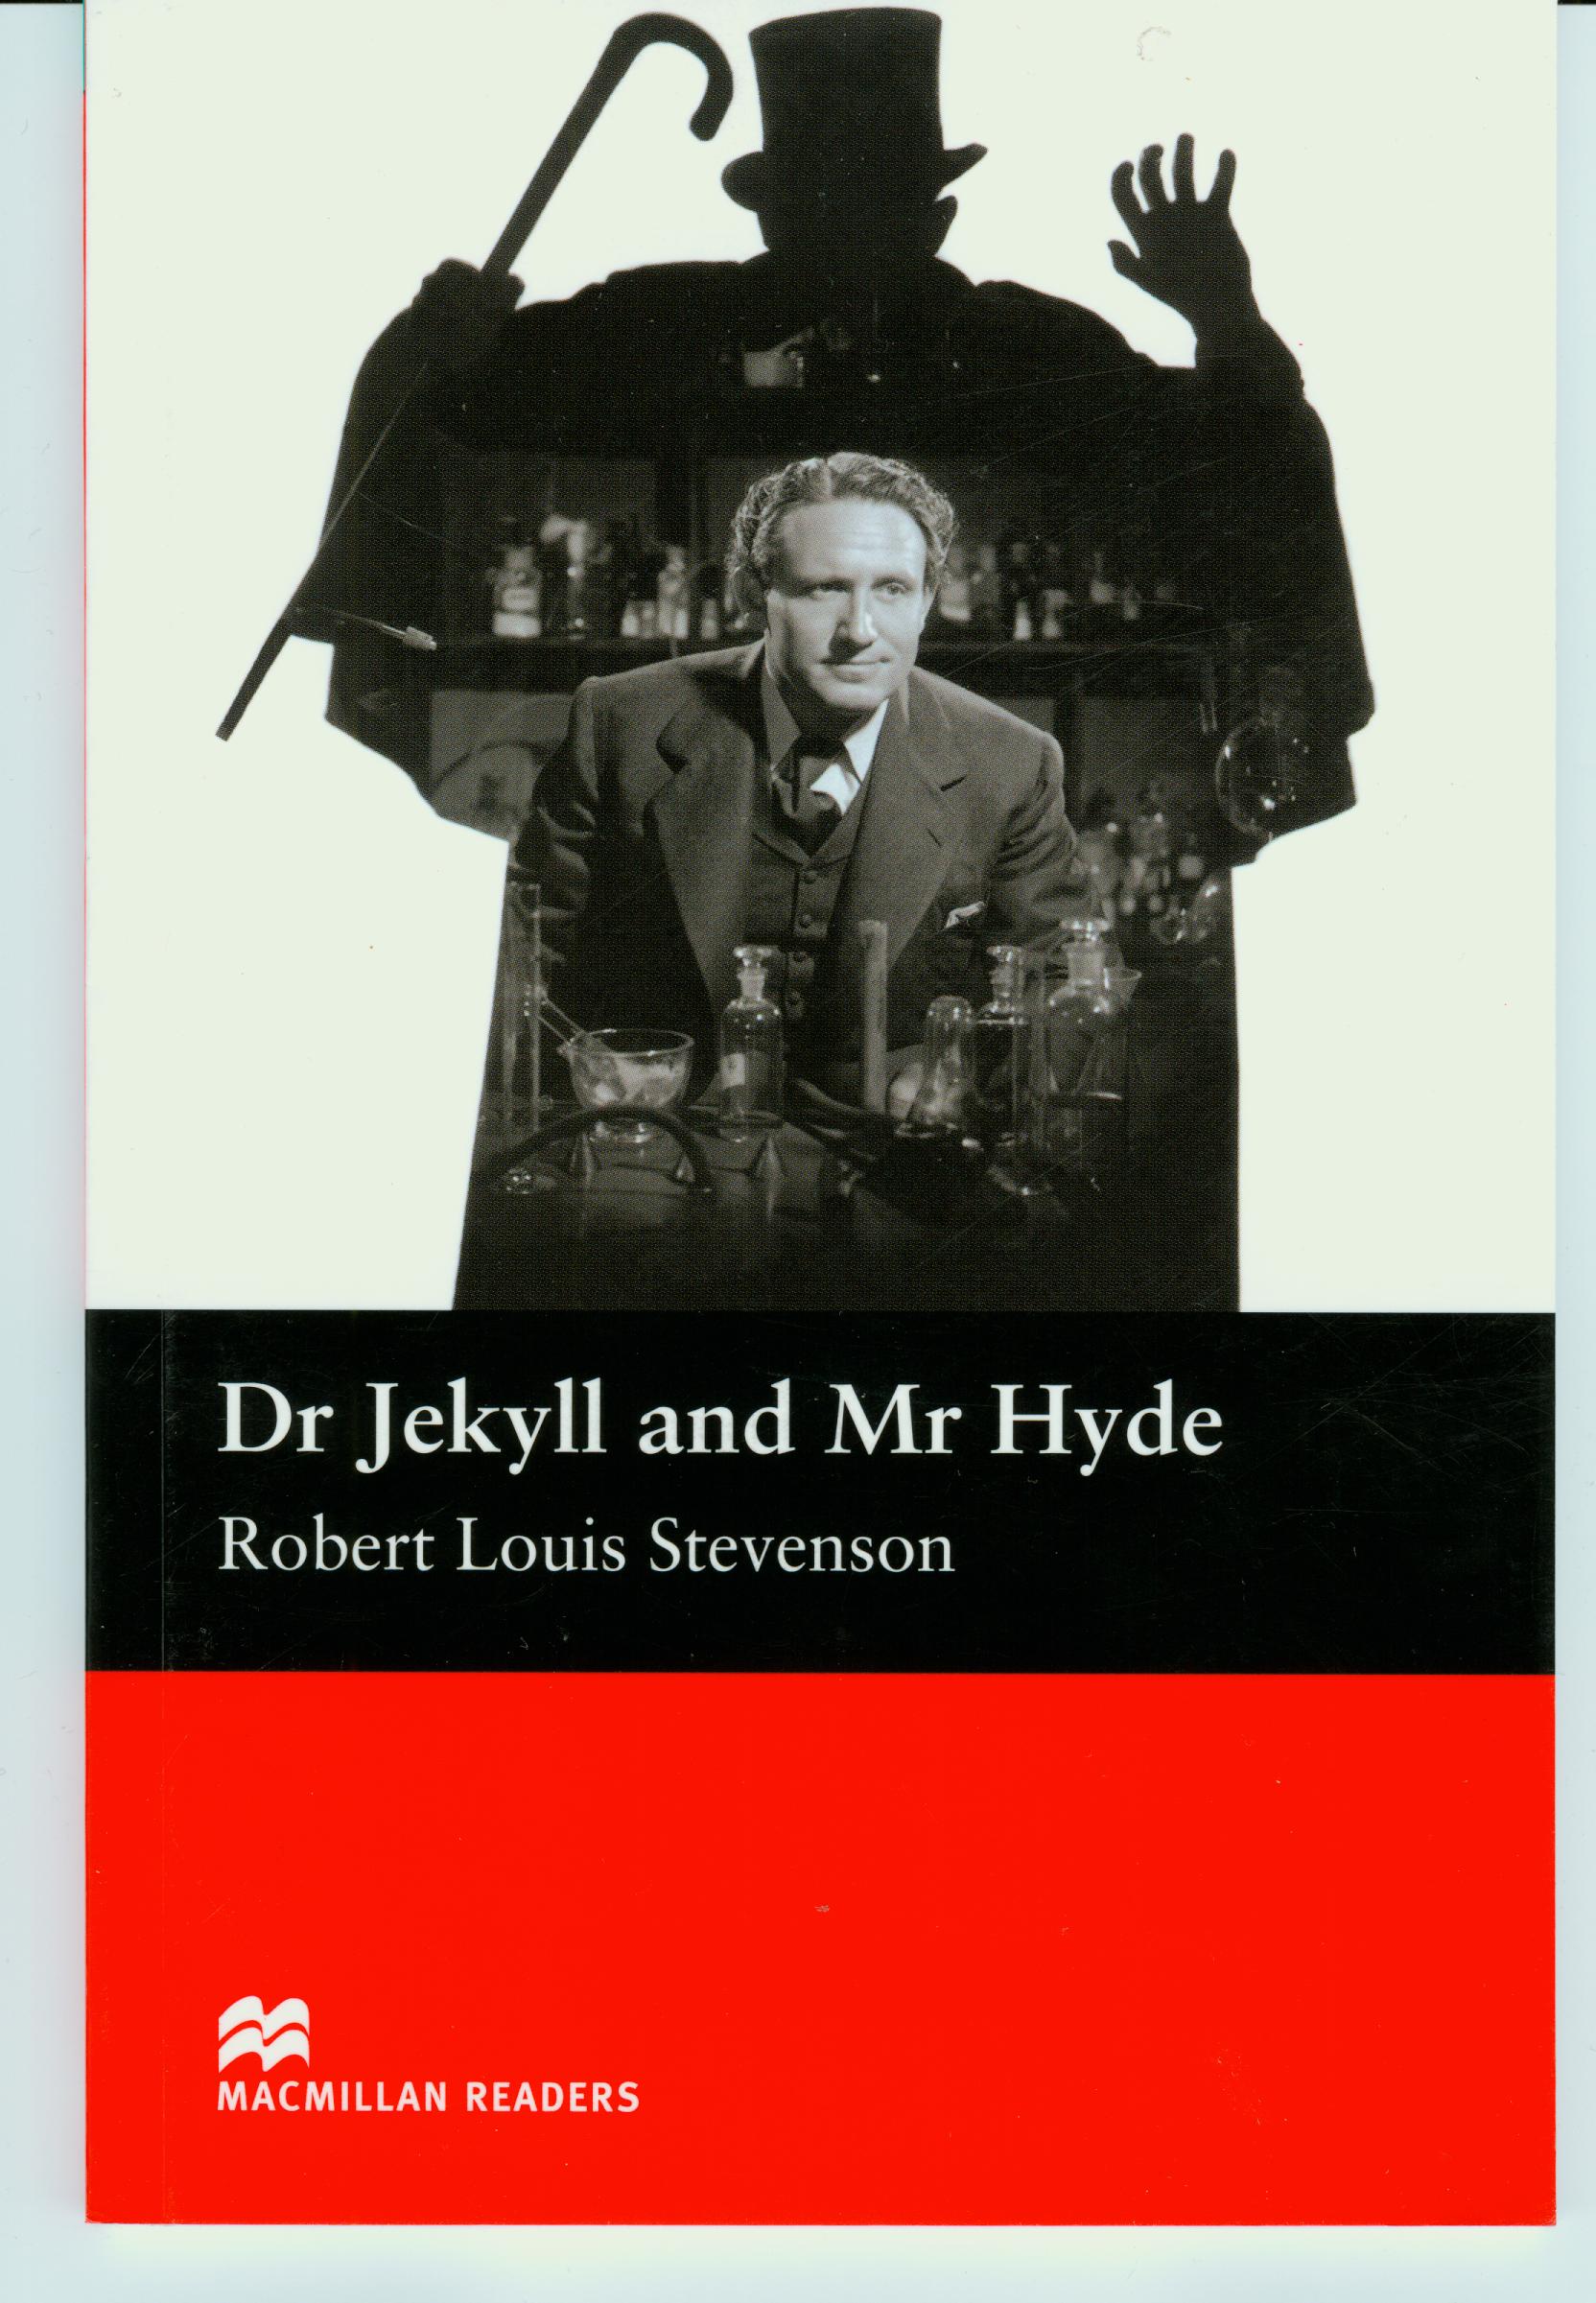 jekyll and hyde book cover